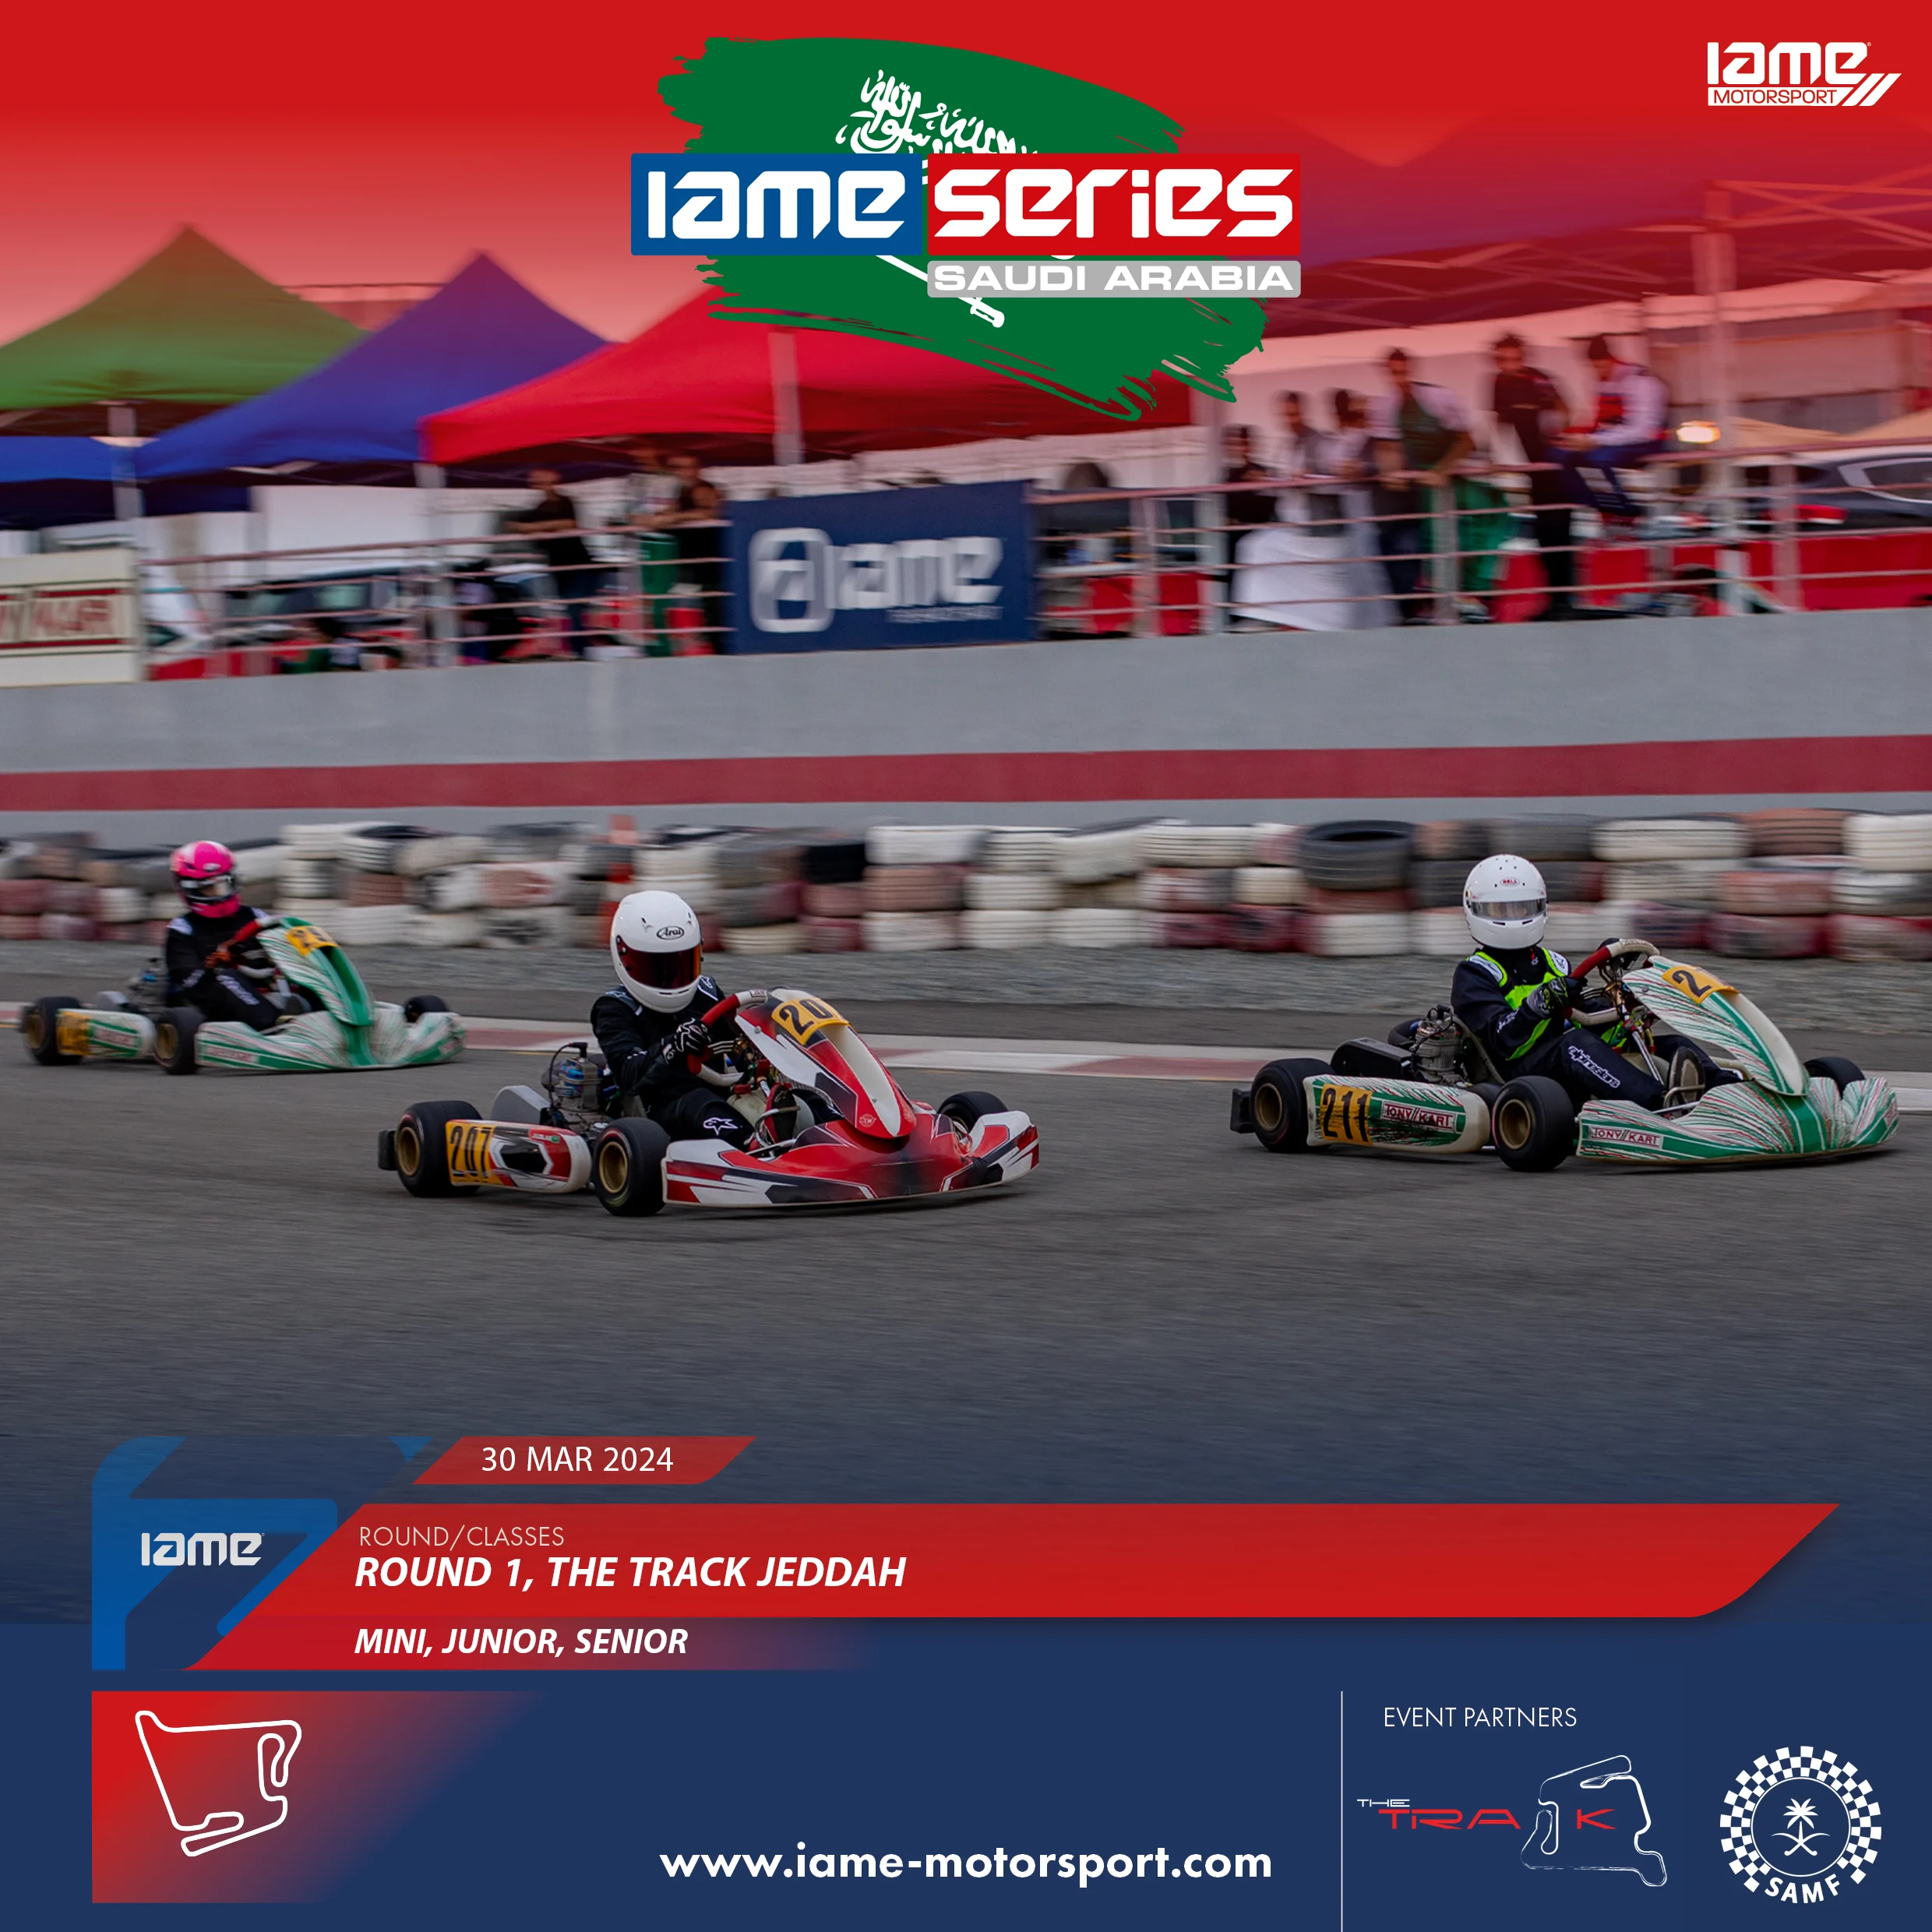 Revving Up for Round 1 - IAME Series Saudi Arabia at The Track Jeddah 